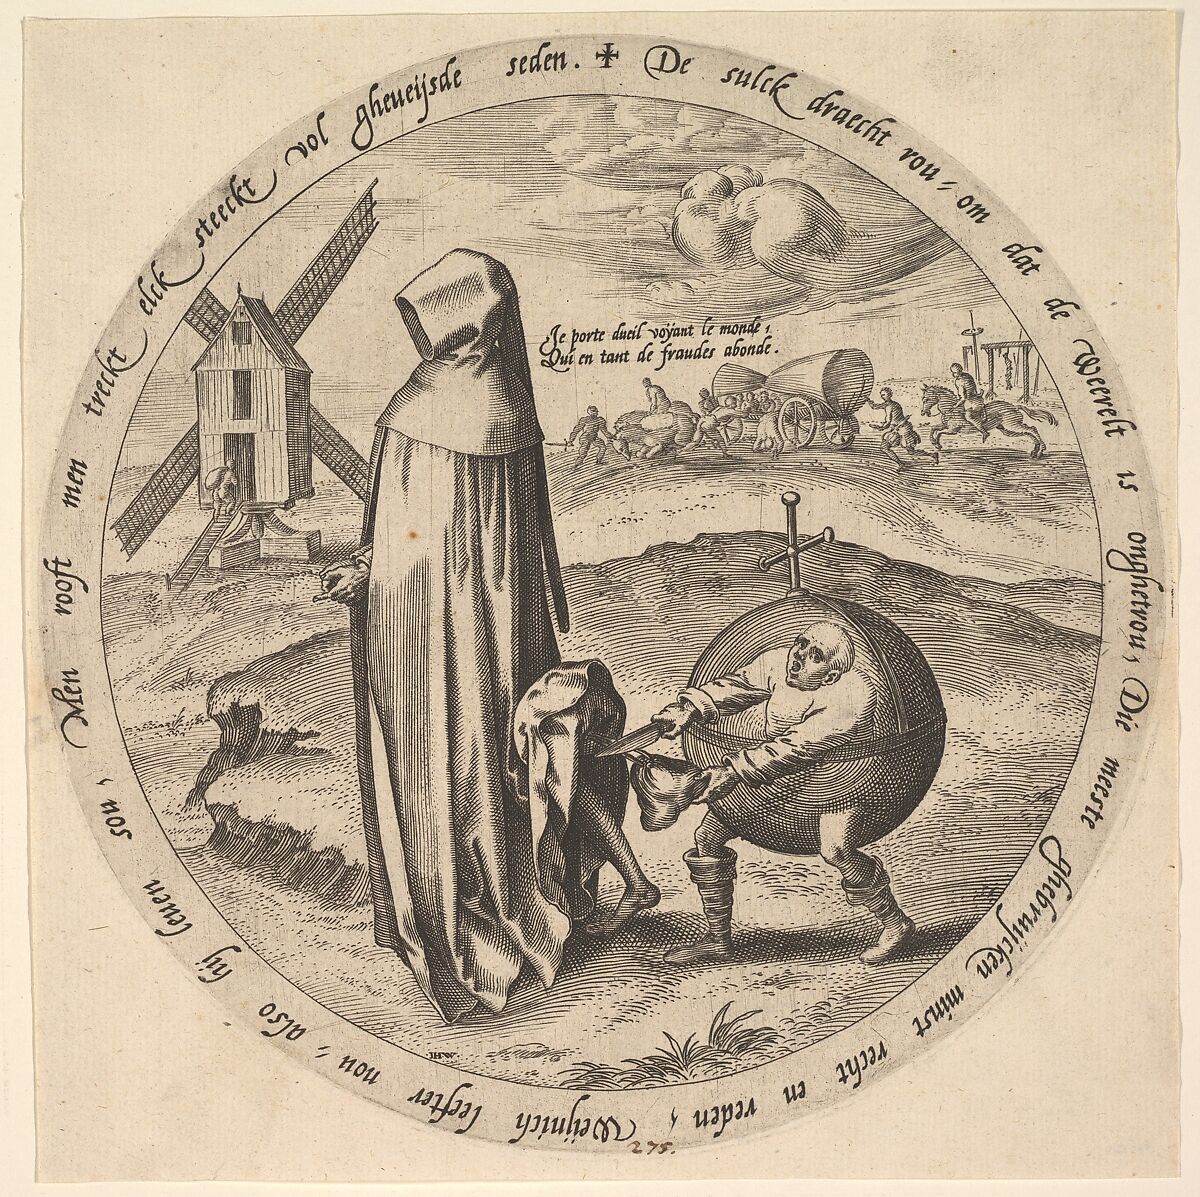 The Misanthrope Robbed by the World, from Twelve Flemish Proverbs, After Pieter Bruegel the Elder (Netherlandish, Breda (?) ca. 1525–1569 Brussels), Engraving 